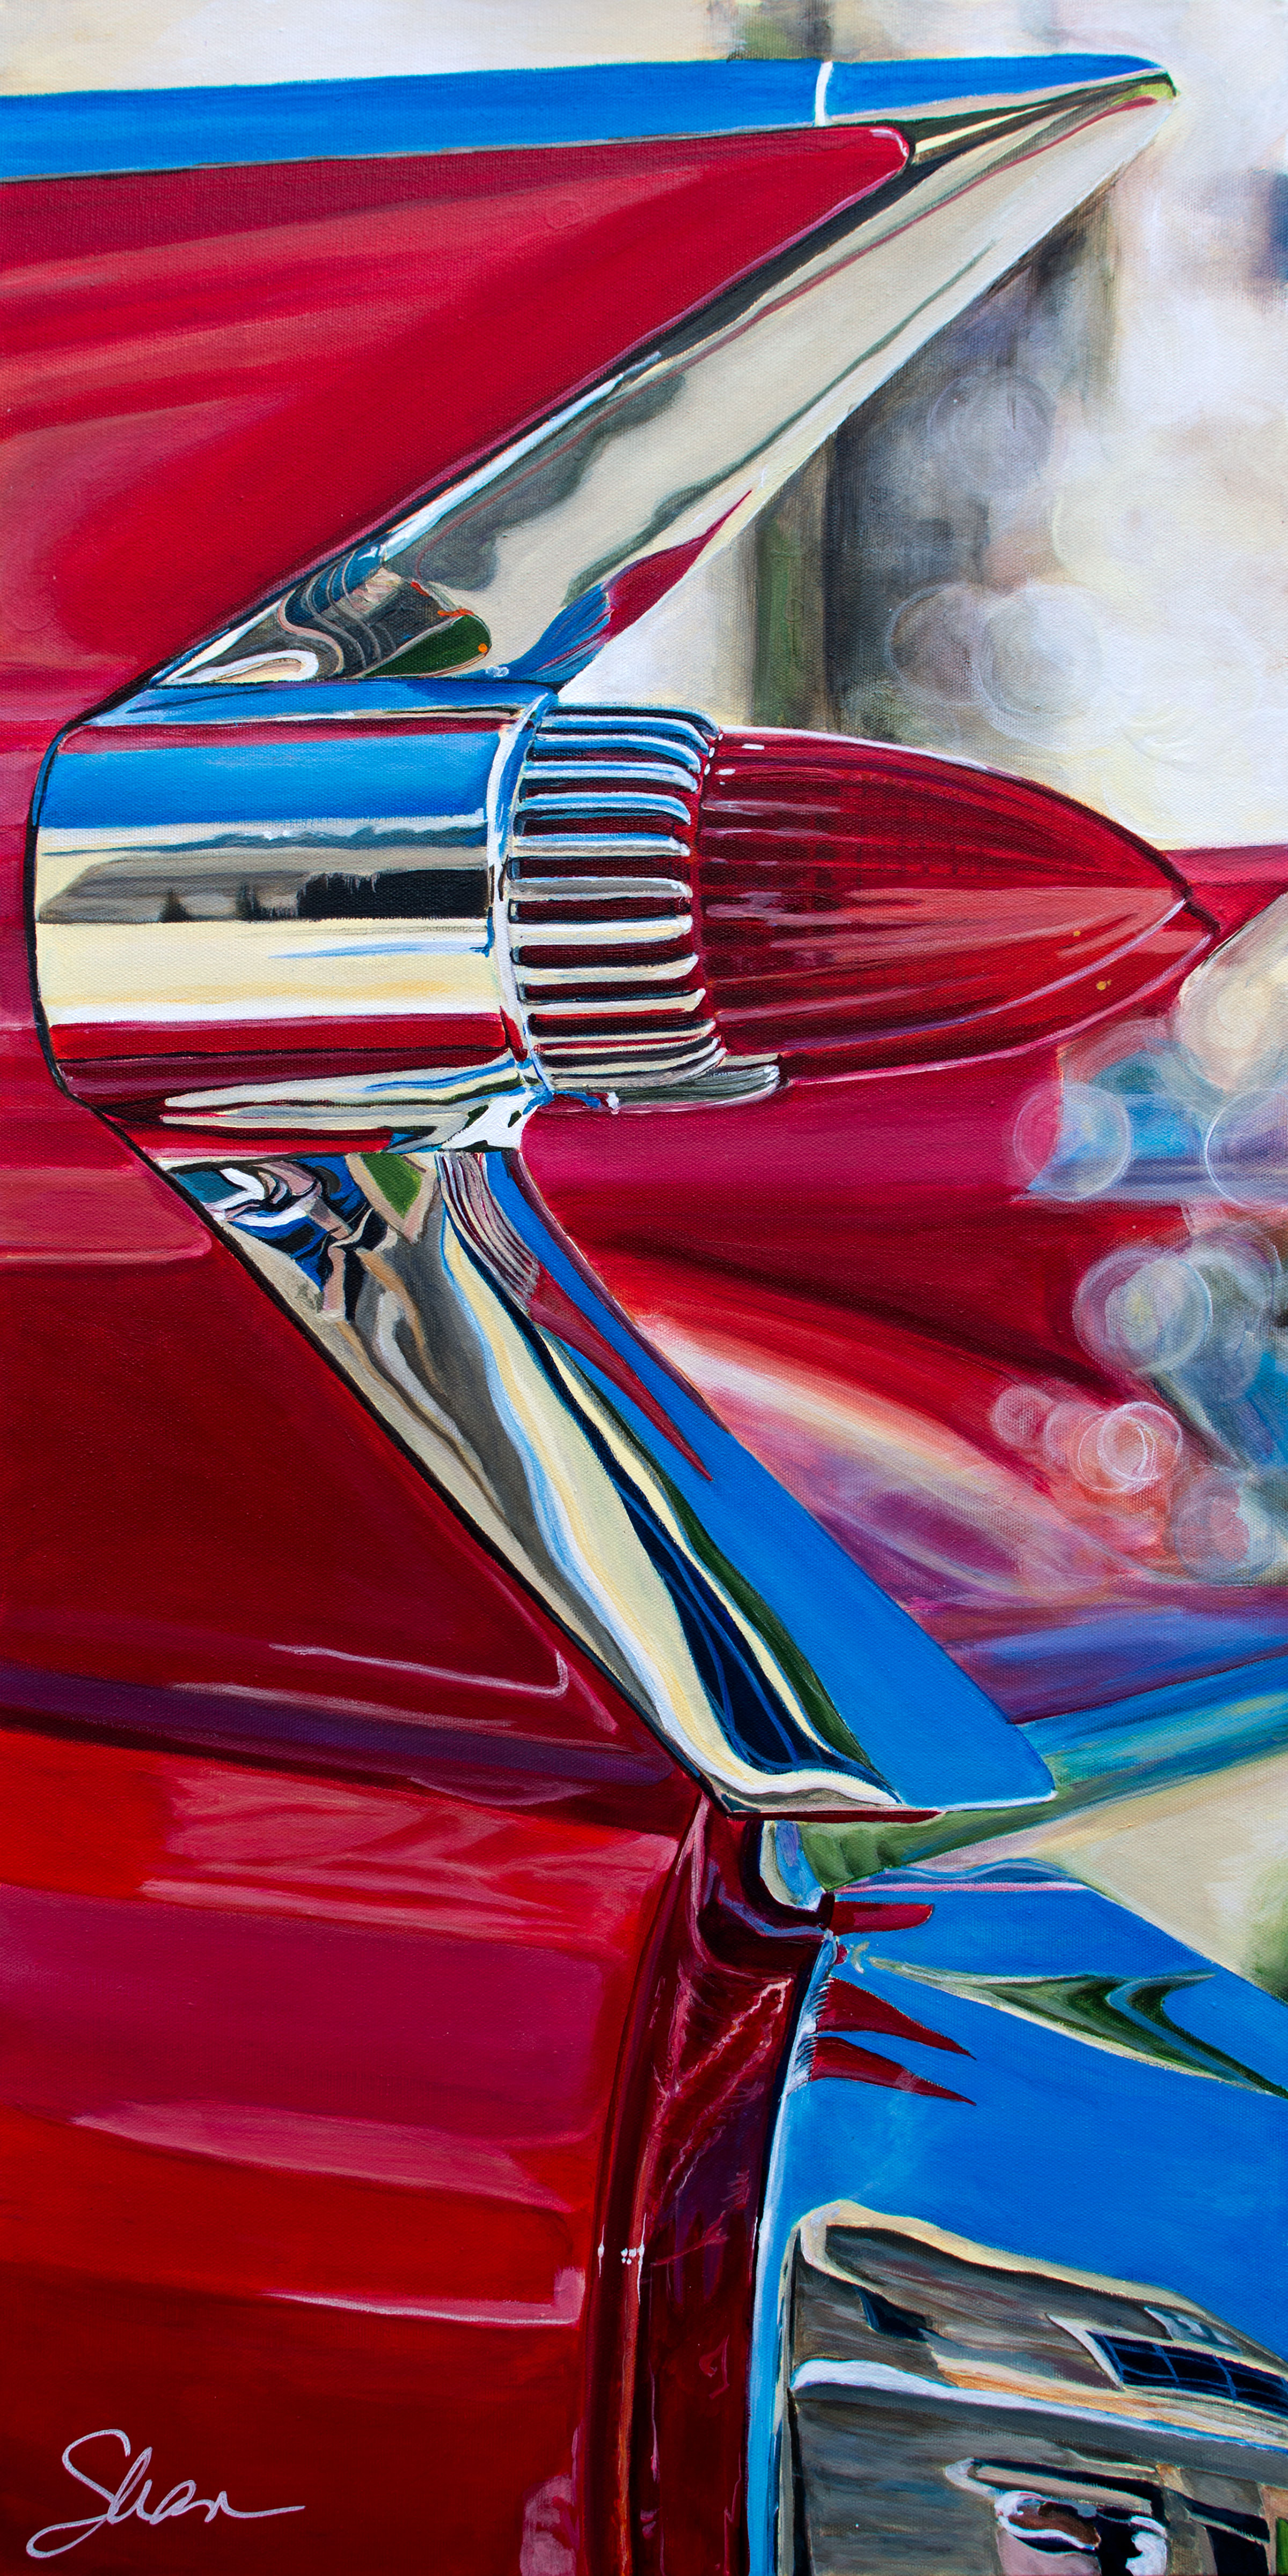  Shannon Fannin │ 1959 Cadillac Coupe deVille Red │ Acrylic on Canvas │ 36 x 24 inches or 91 ½ x 61 cm 